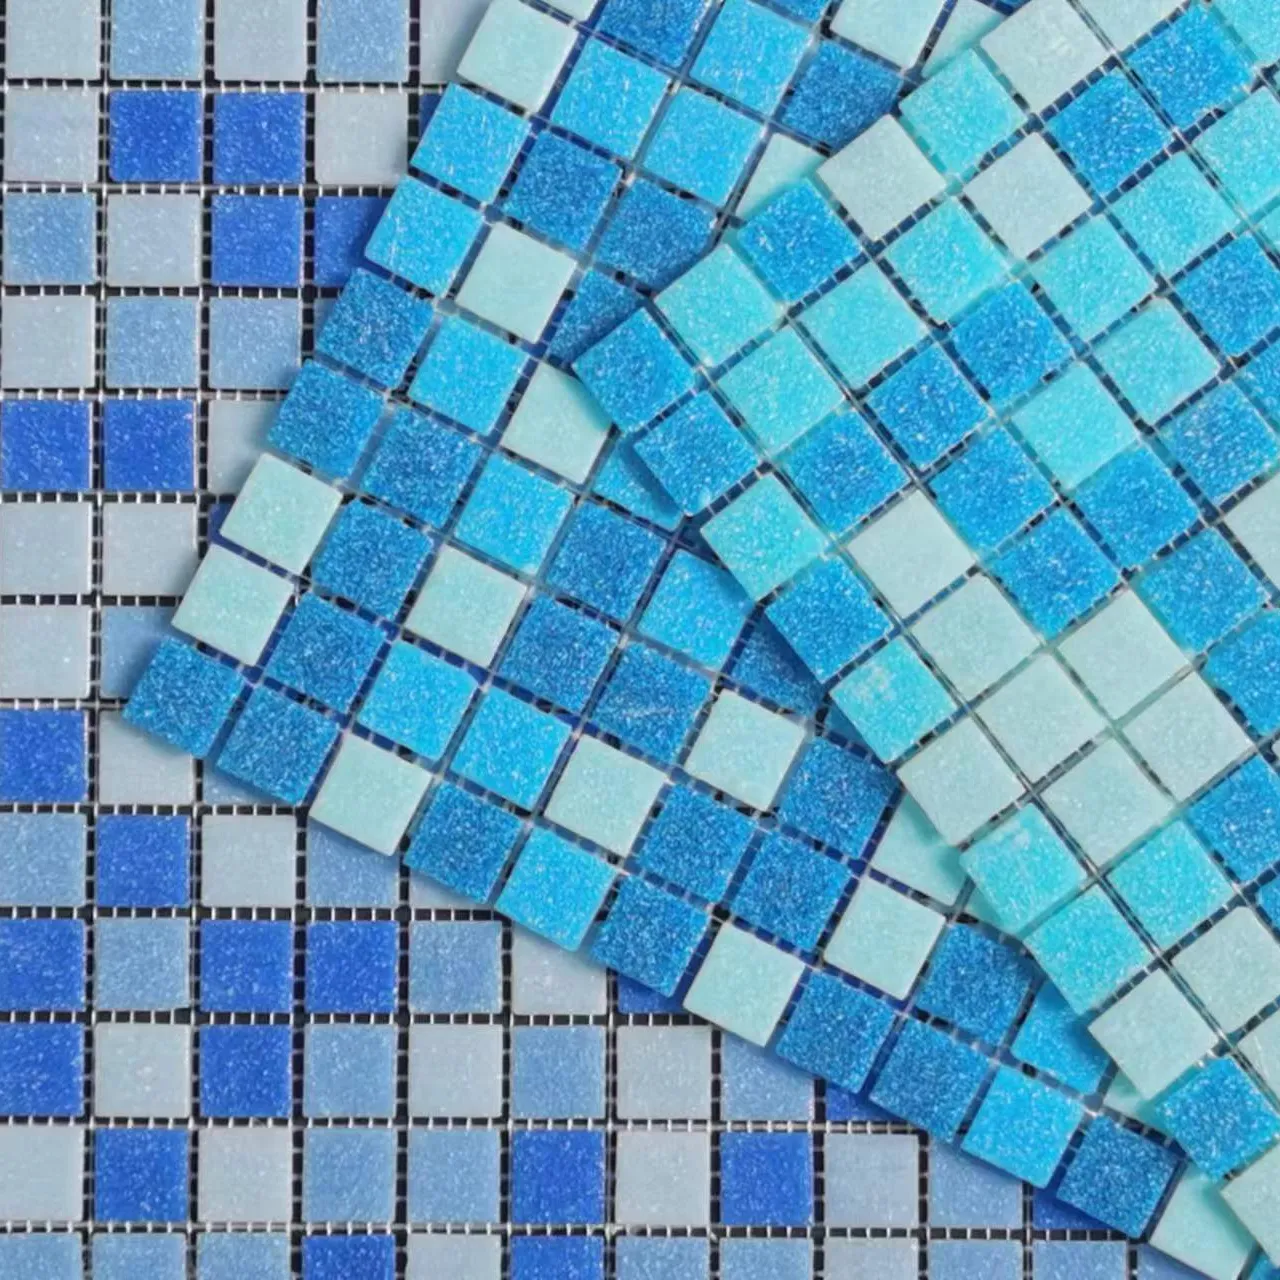 WELLDE Hot-Melting Mosaic Tiles Blue Swimming Pool Glass Mosaic for Indoor and Outdoor Wall Decorations